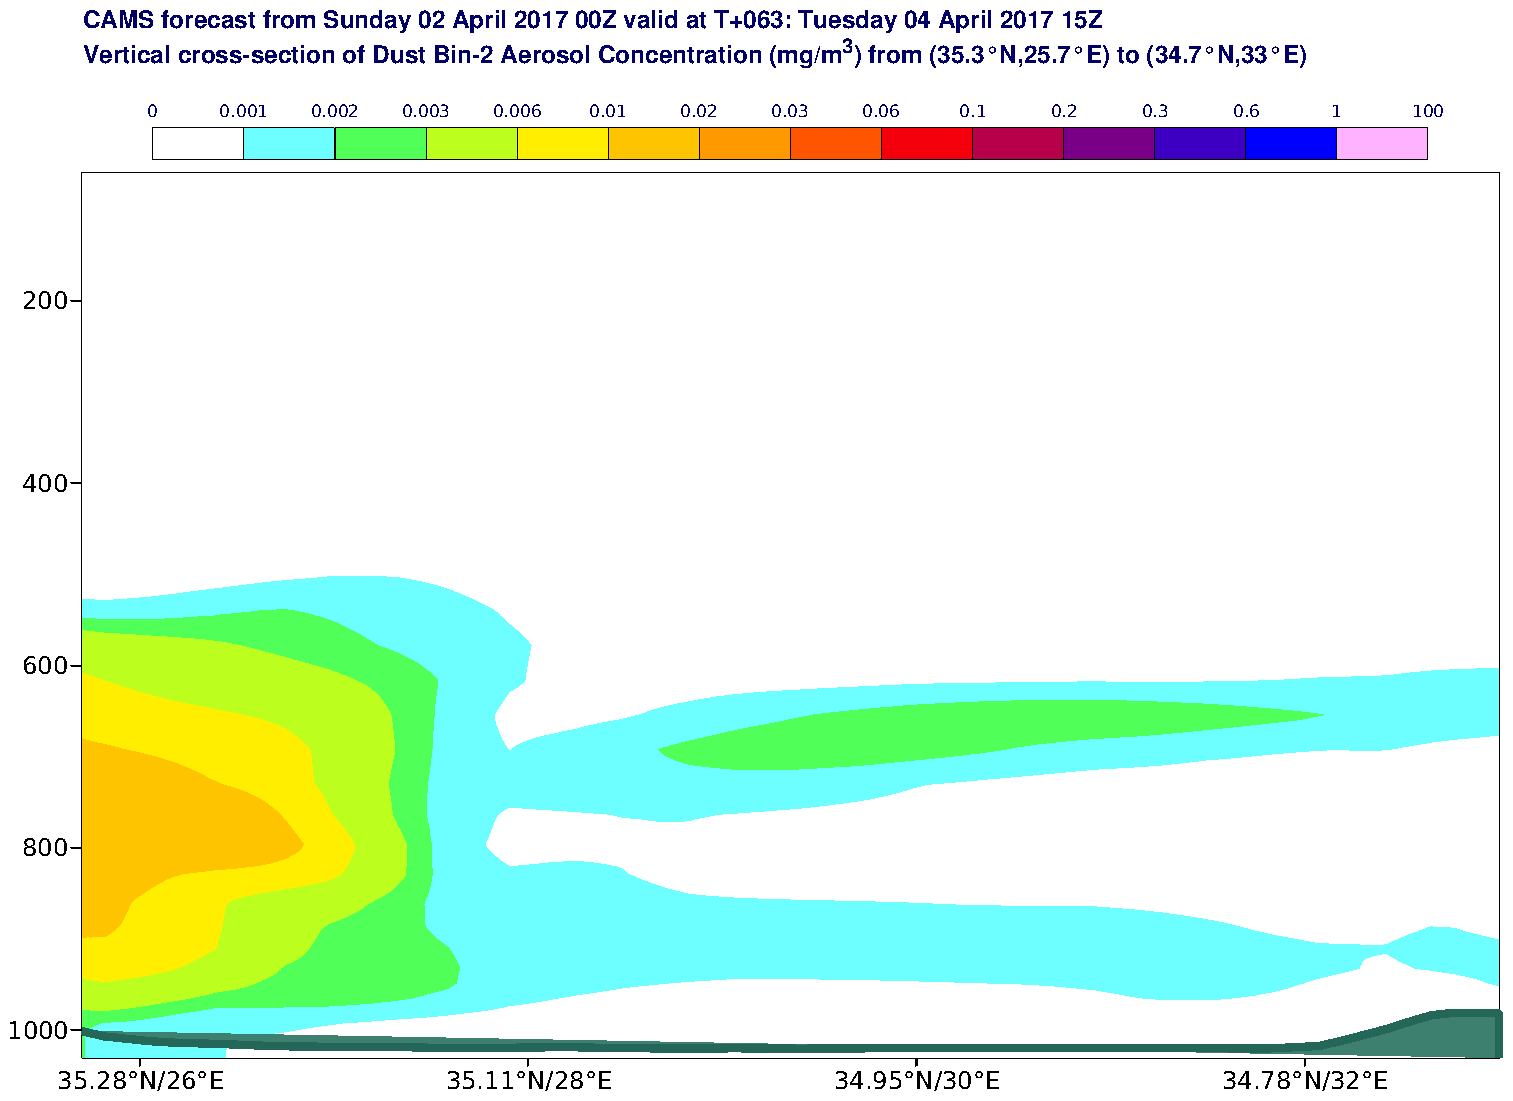 Vertical cross-section of Dust Bin-2 Aerosol Concentration (mg/m3) valid at T63 - 2017-04-04 15:00